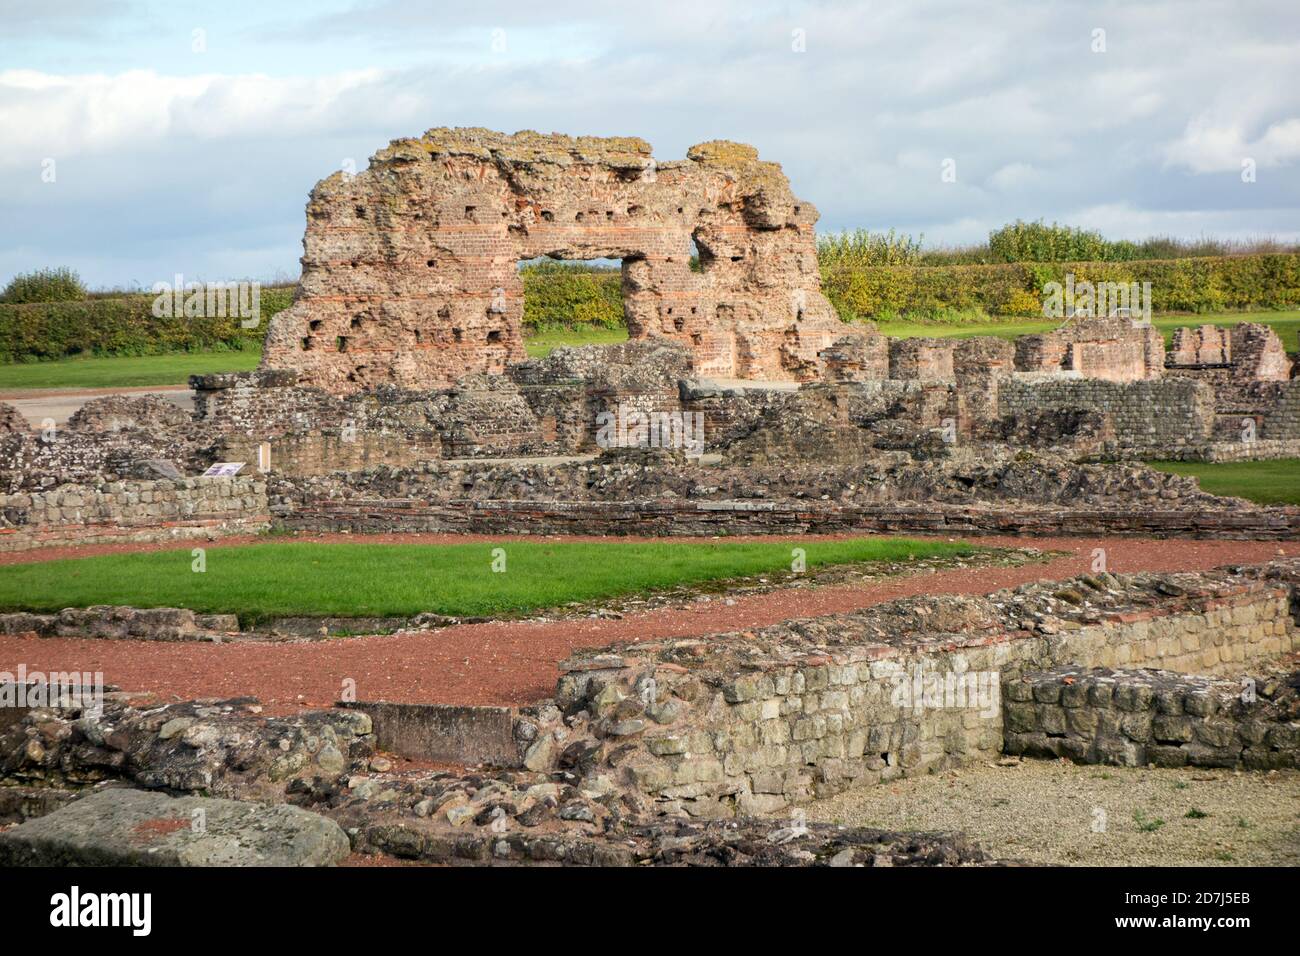 Roman remains of Wroxeter, Viroconium Cornoviorum, the fourth largest city in Roman Britain, situated just outside Shrewsbury in Shropshire England Stock Photo